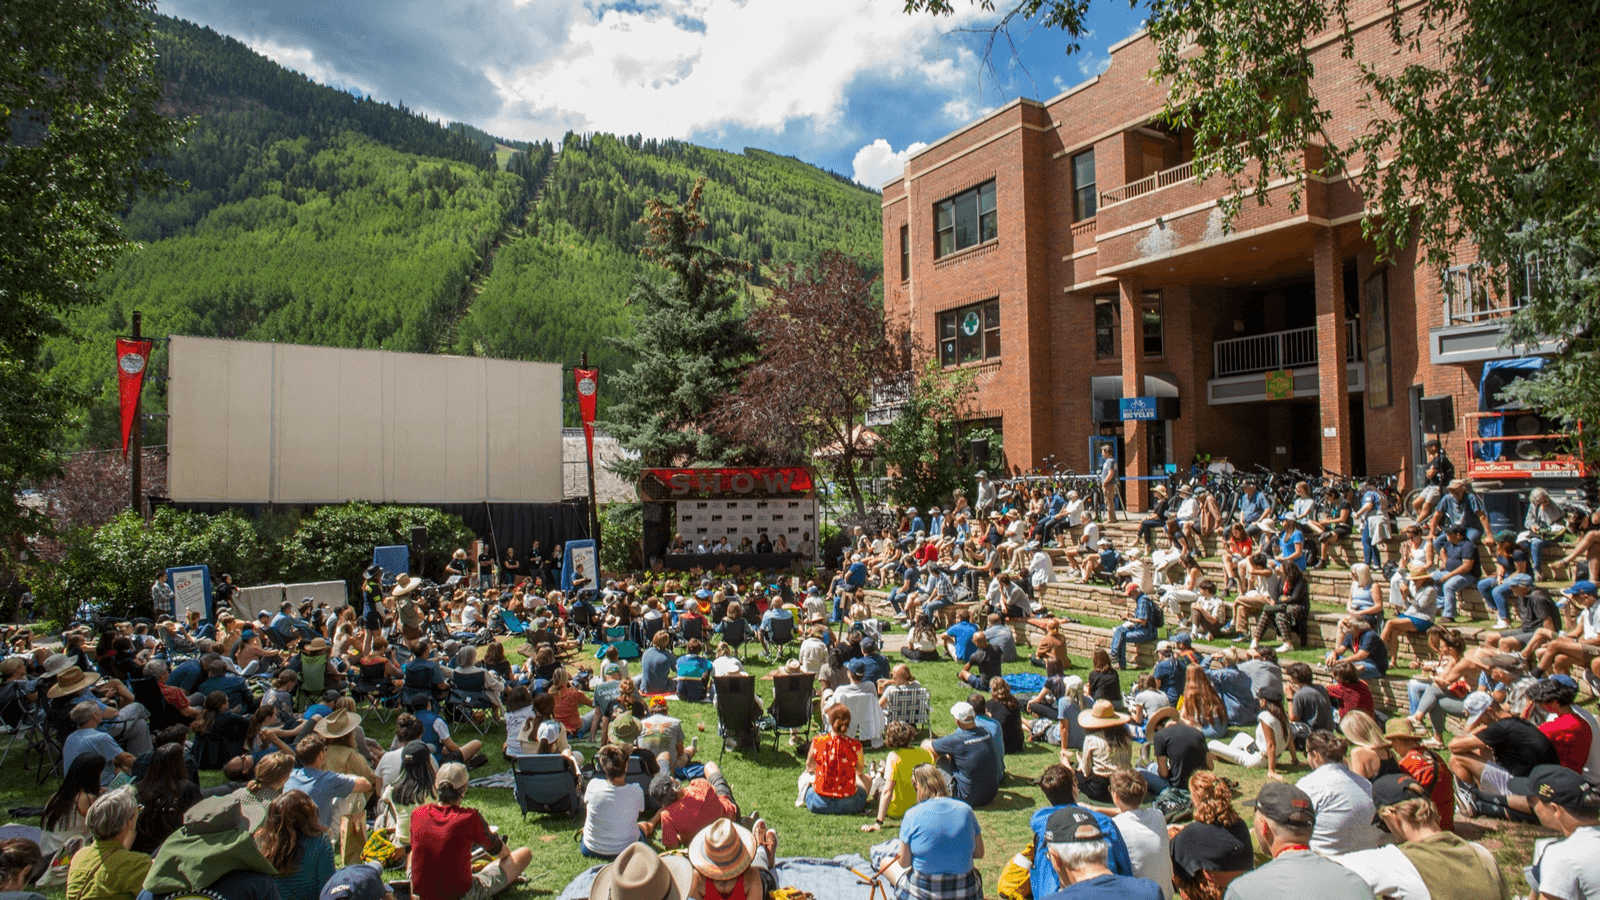 What Is Film Distribution A crowd at Telluride Film distribution process